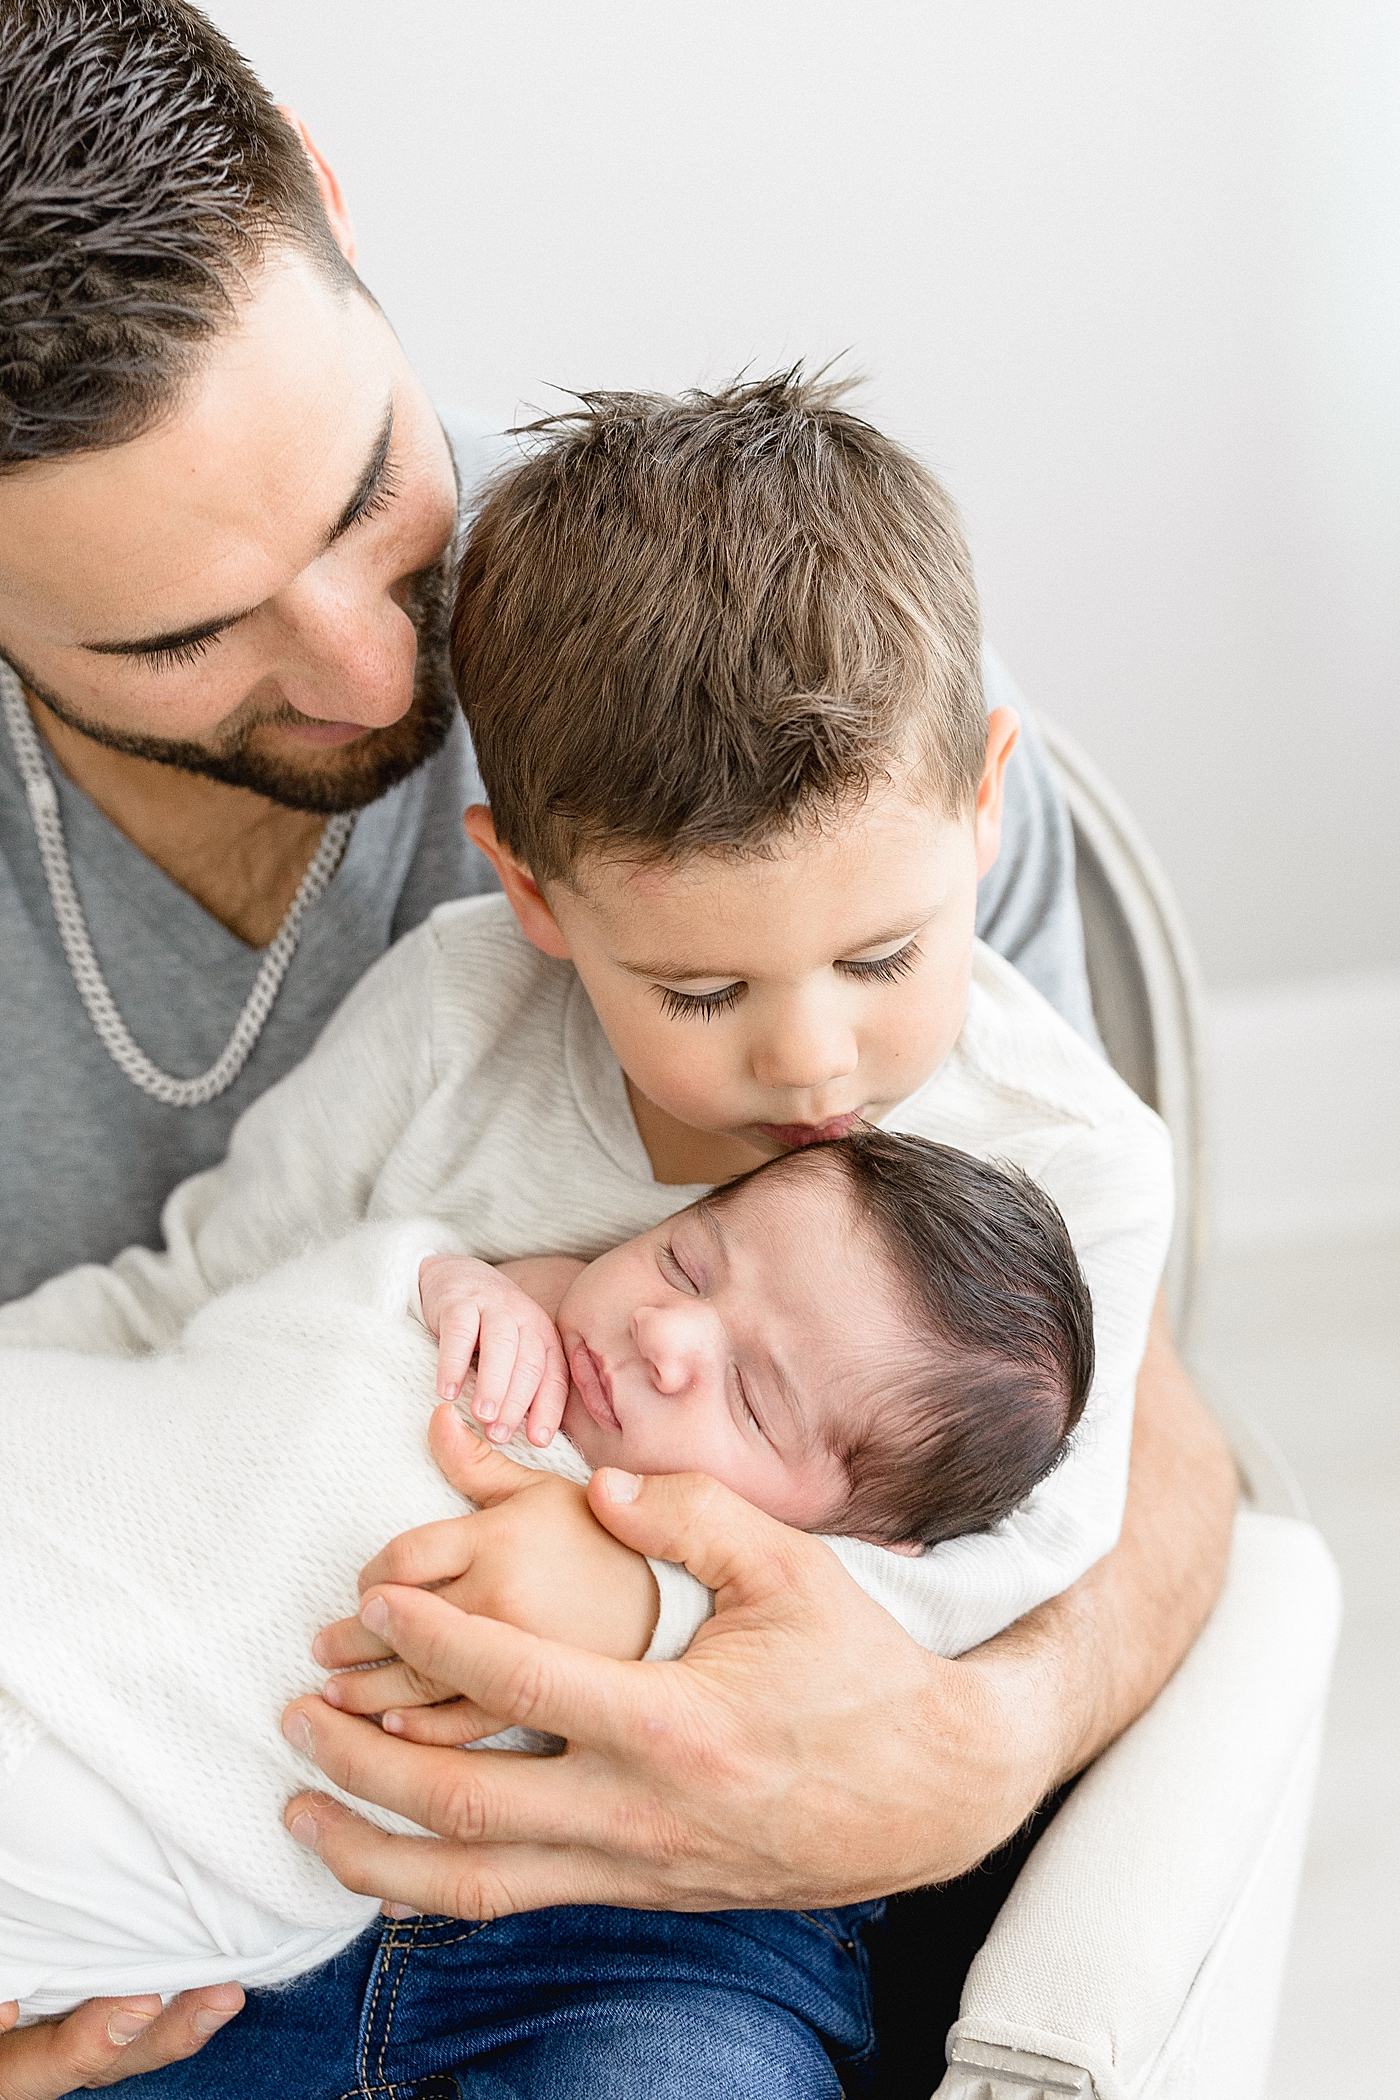 Kevin Kiermaier of the Tampa Bay Rays holds his two boys during newborn photos. Photo by Brittany Elise Photography.